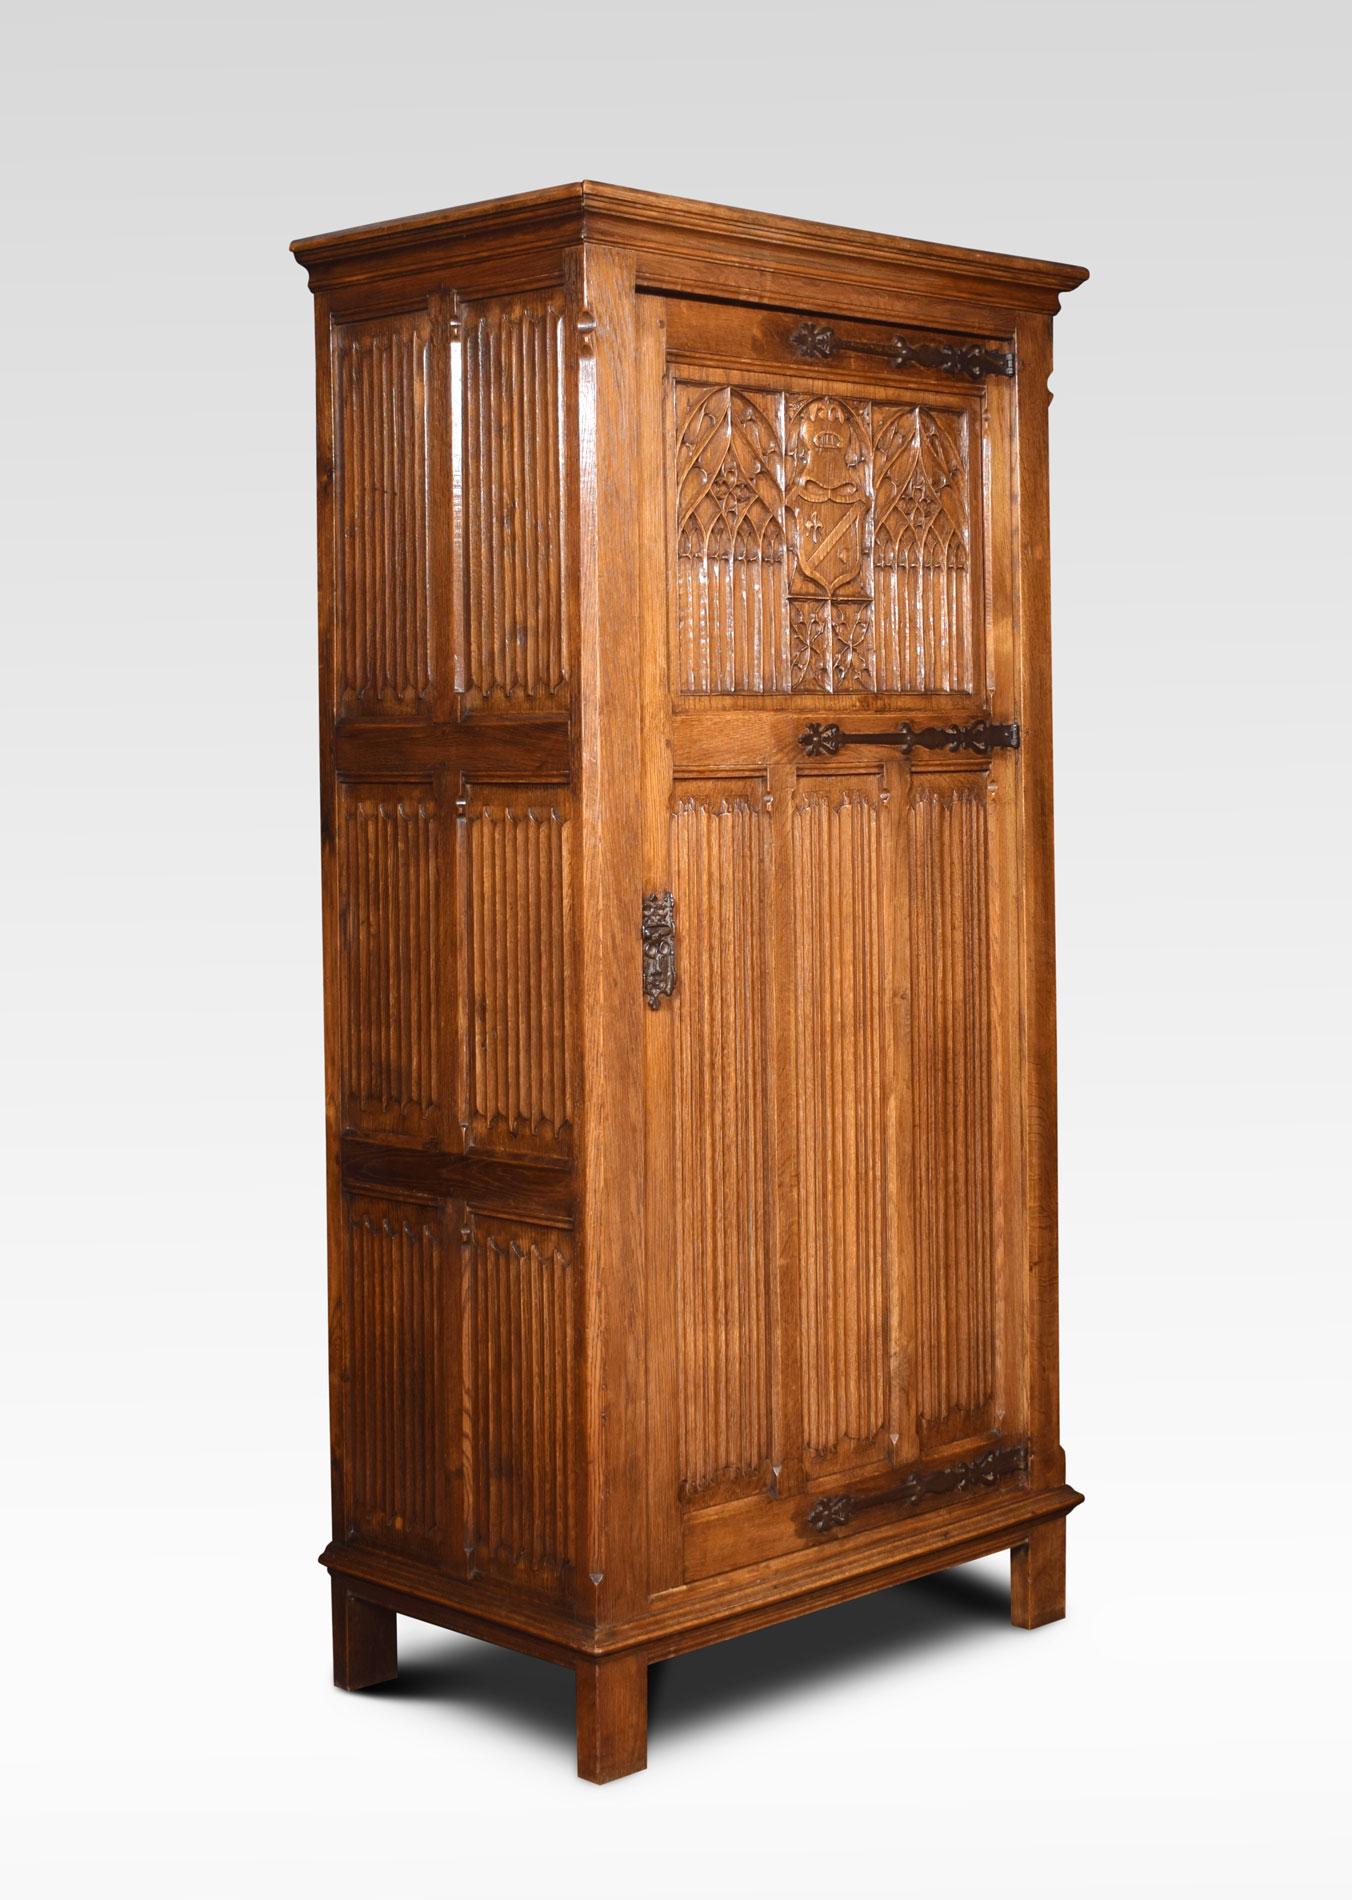 Solid oak wardrobe the moulded cornice above the large door with cast strap hinges Gothic tracery and linenfold decoration. Opening to reveal large hanging area and shelf to the top. All raised up on bracket feet
Dimensions
Height 70.5